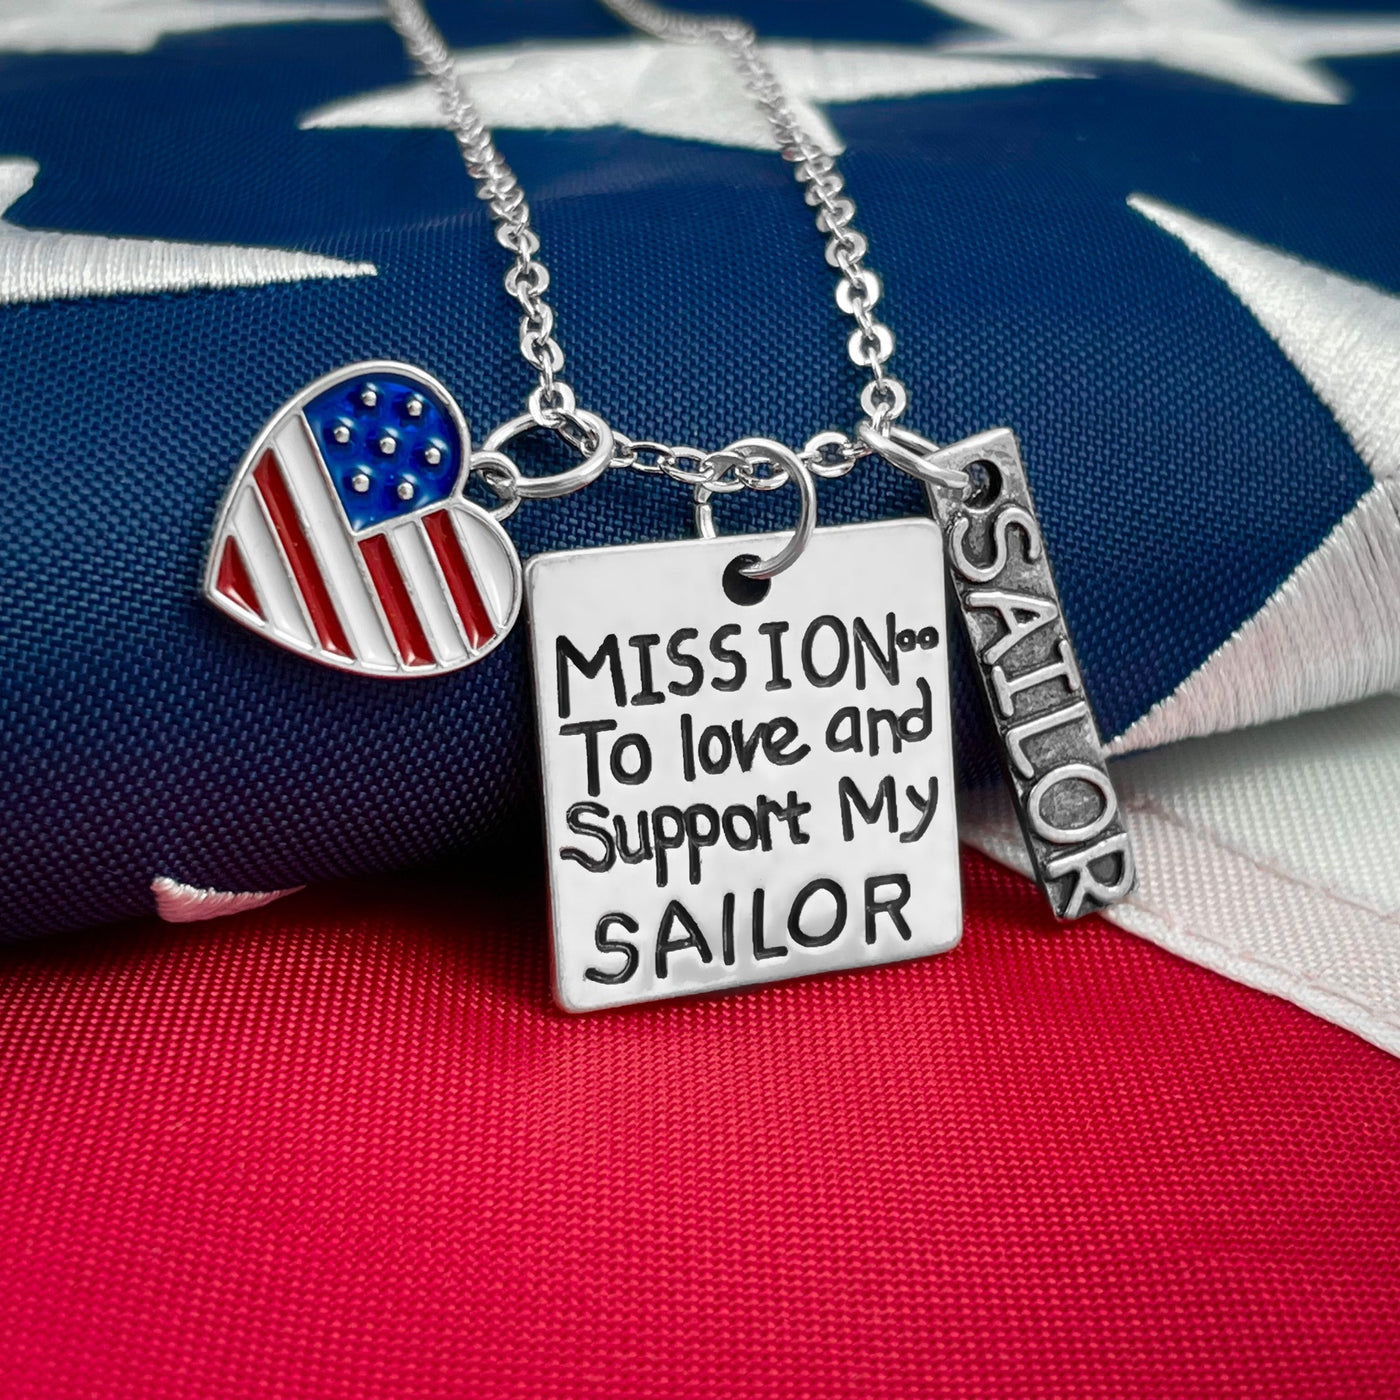 Love and Support My Sailor Necklace